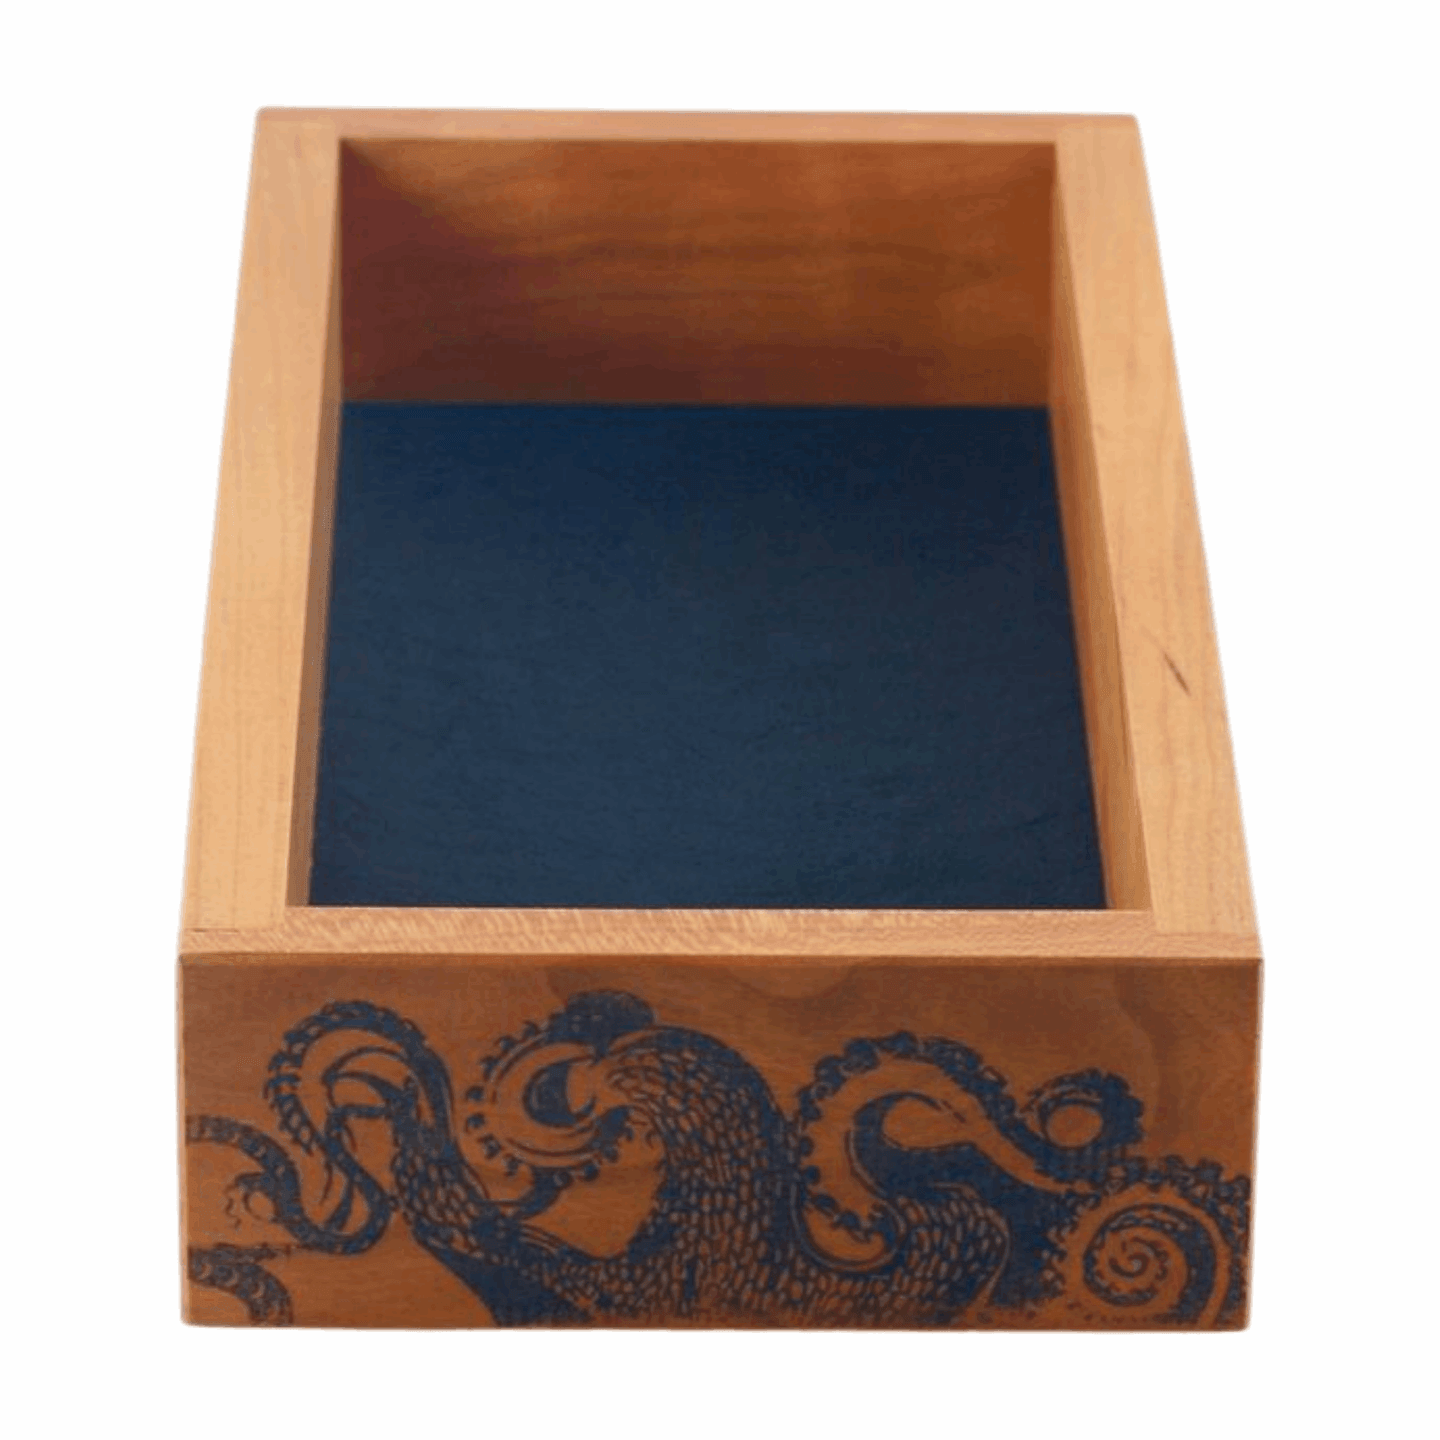 Medium Cherry Dice Tray with Tentacle Design for Tabletop Gaming - Dragon Armor Games